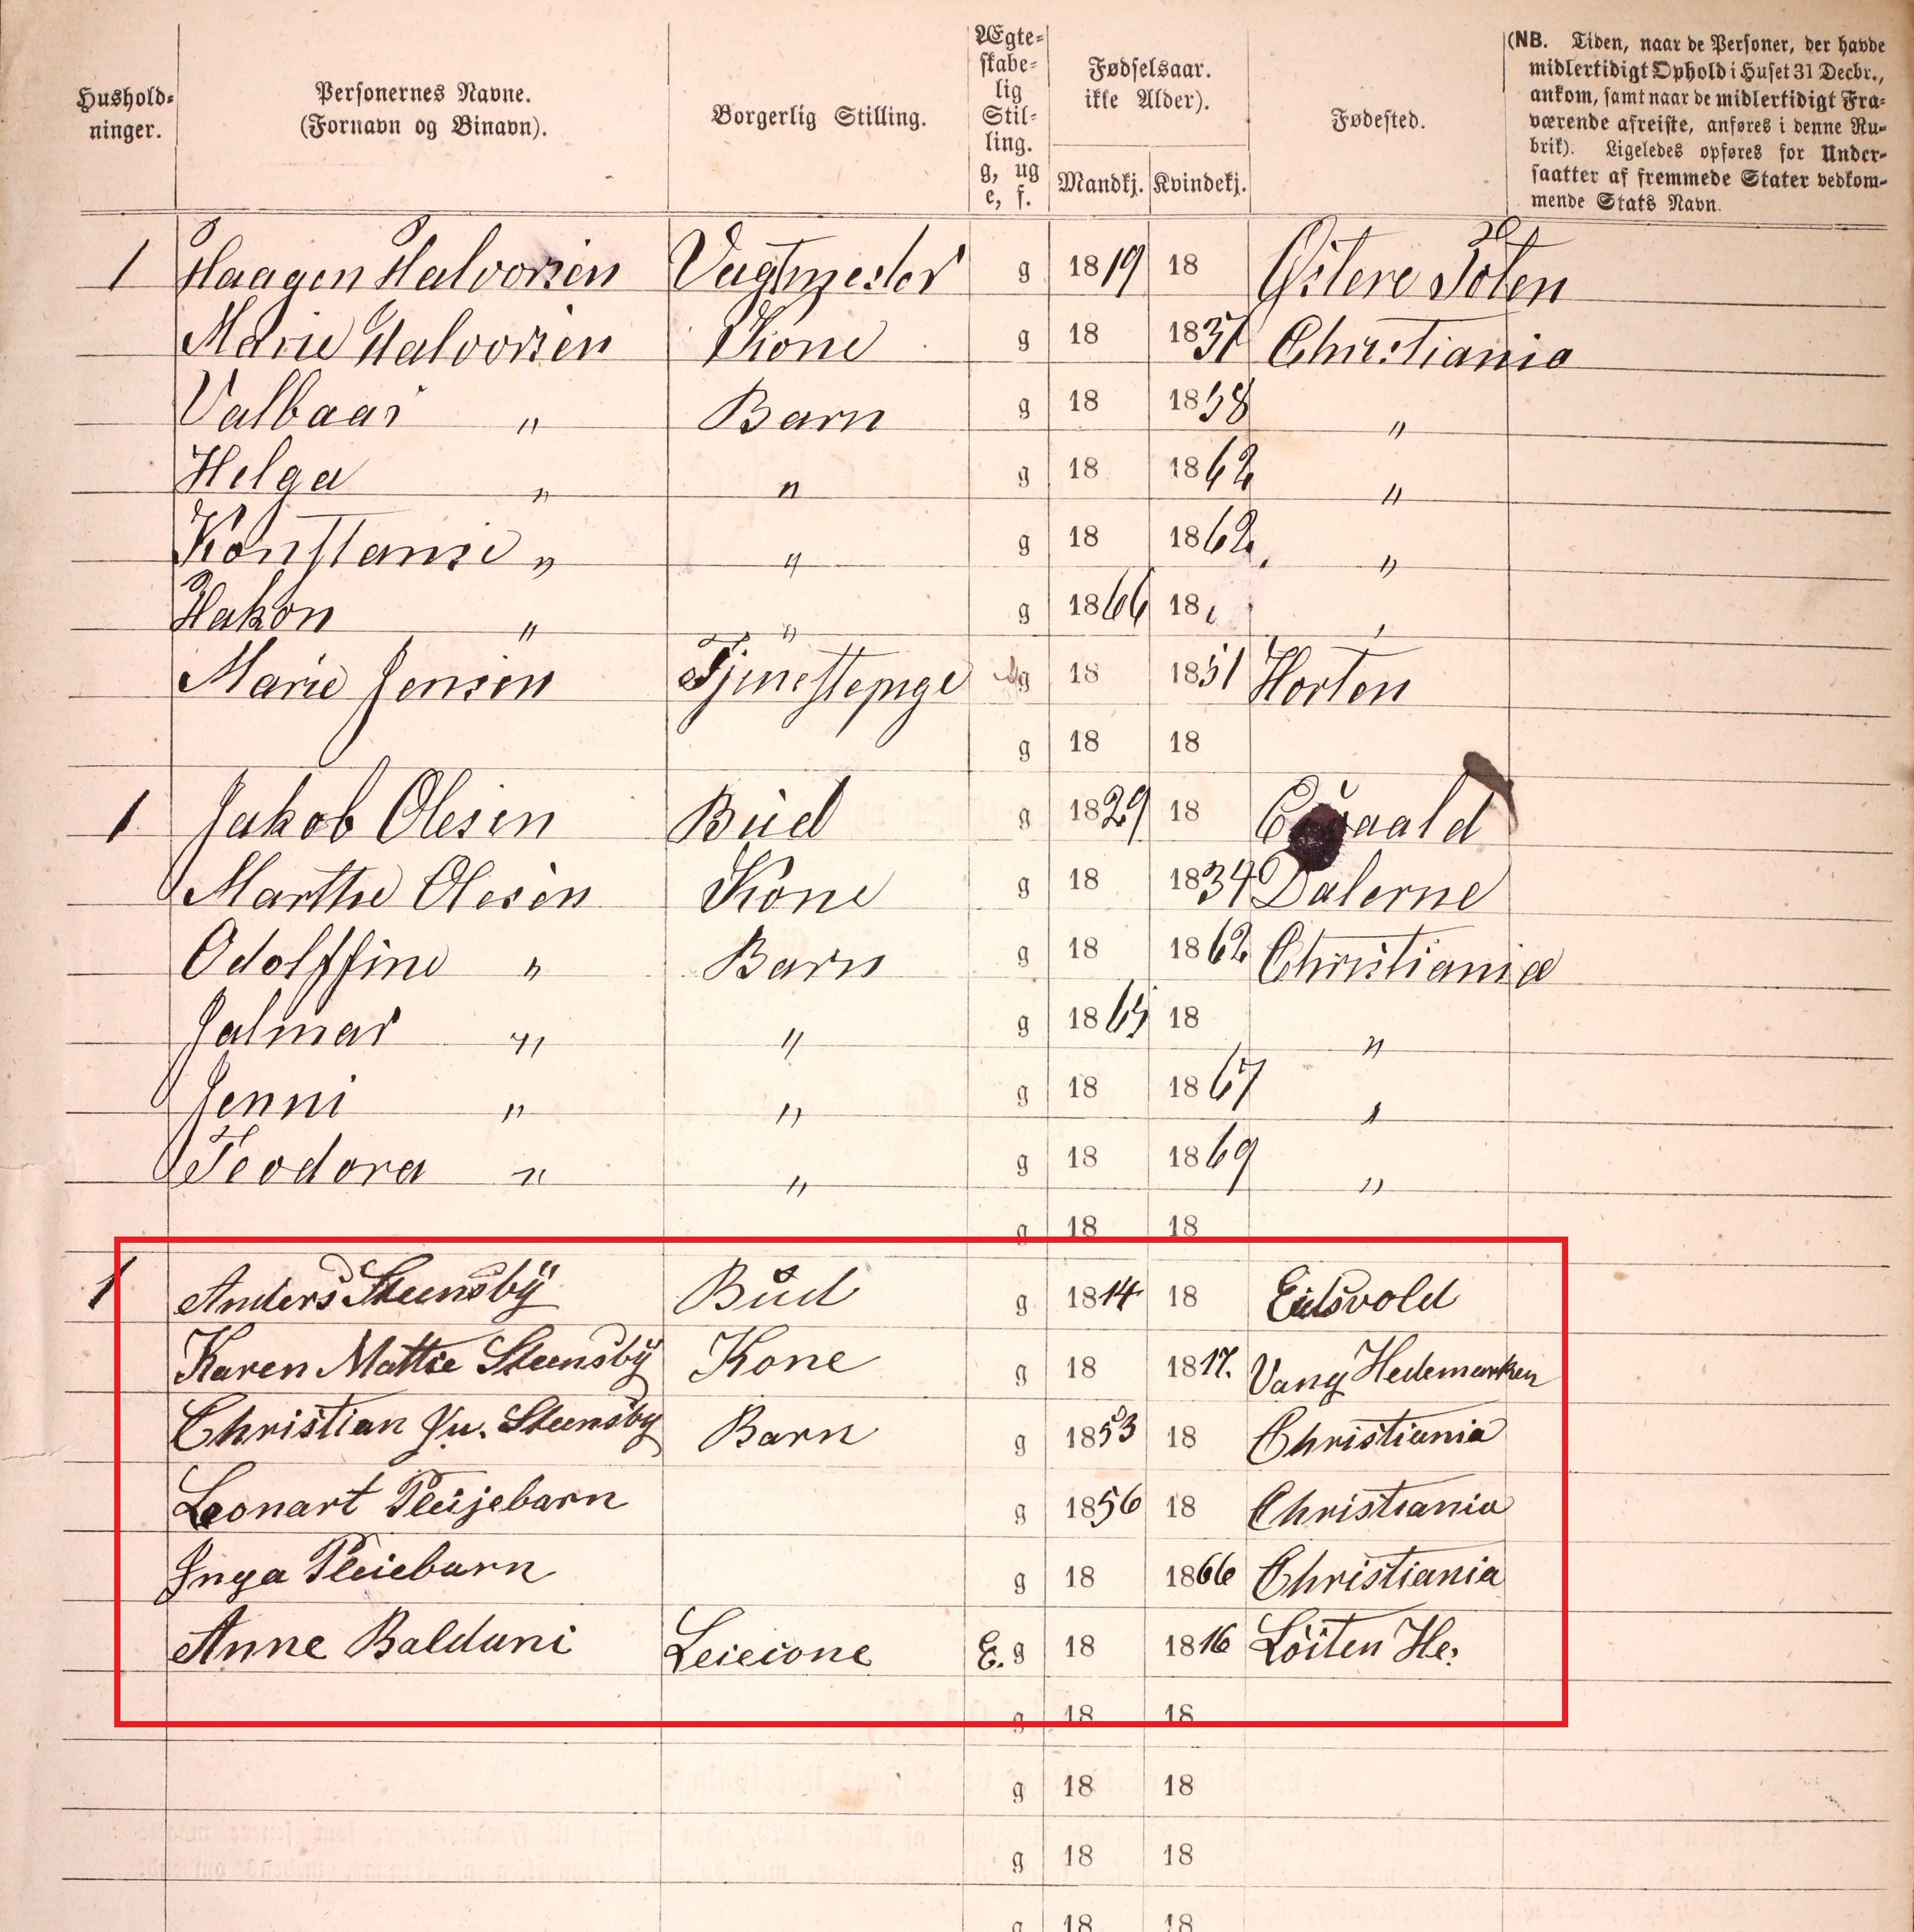 1870 census record of Anders Steensby and family [MyHeritage 1870 Norway Census Records]